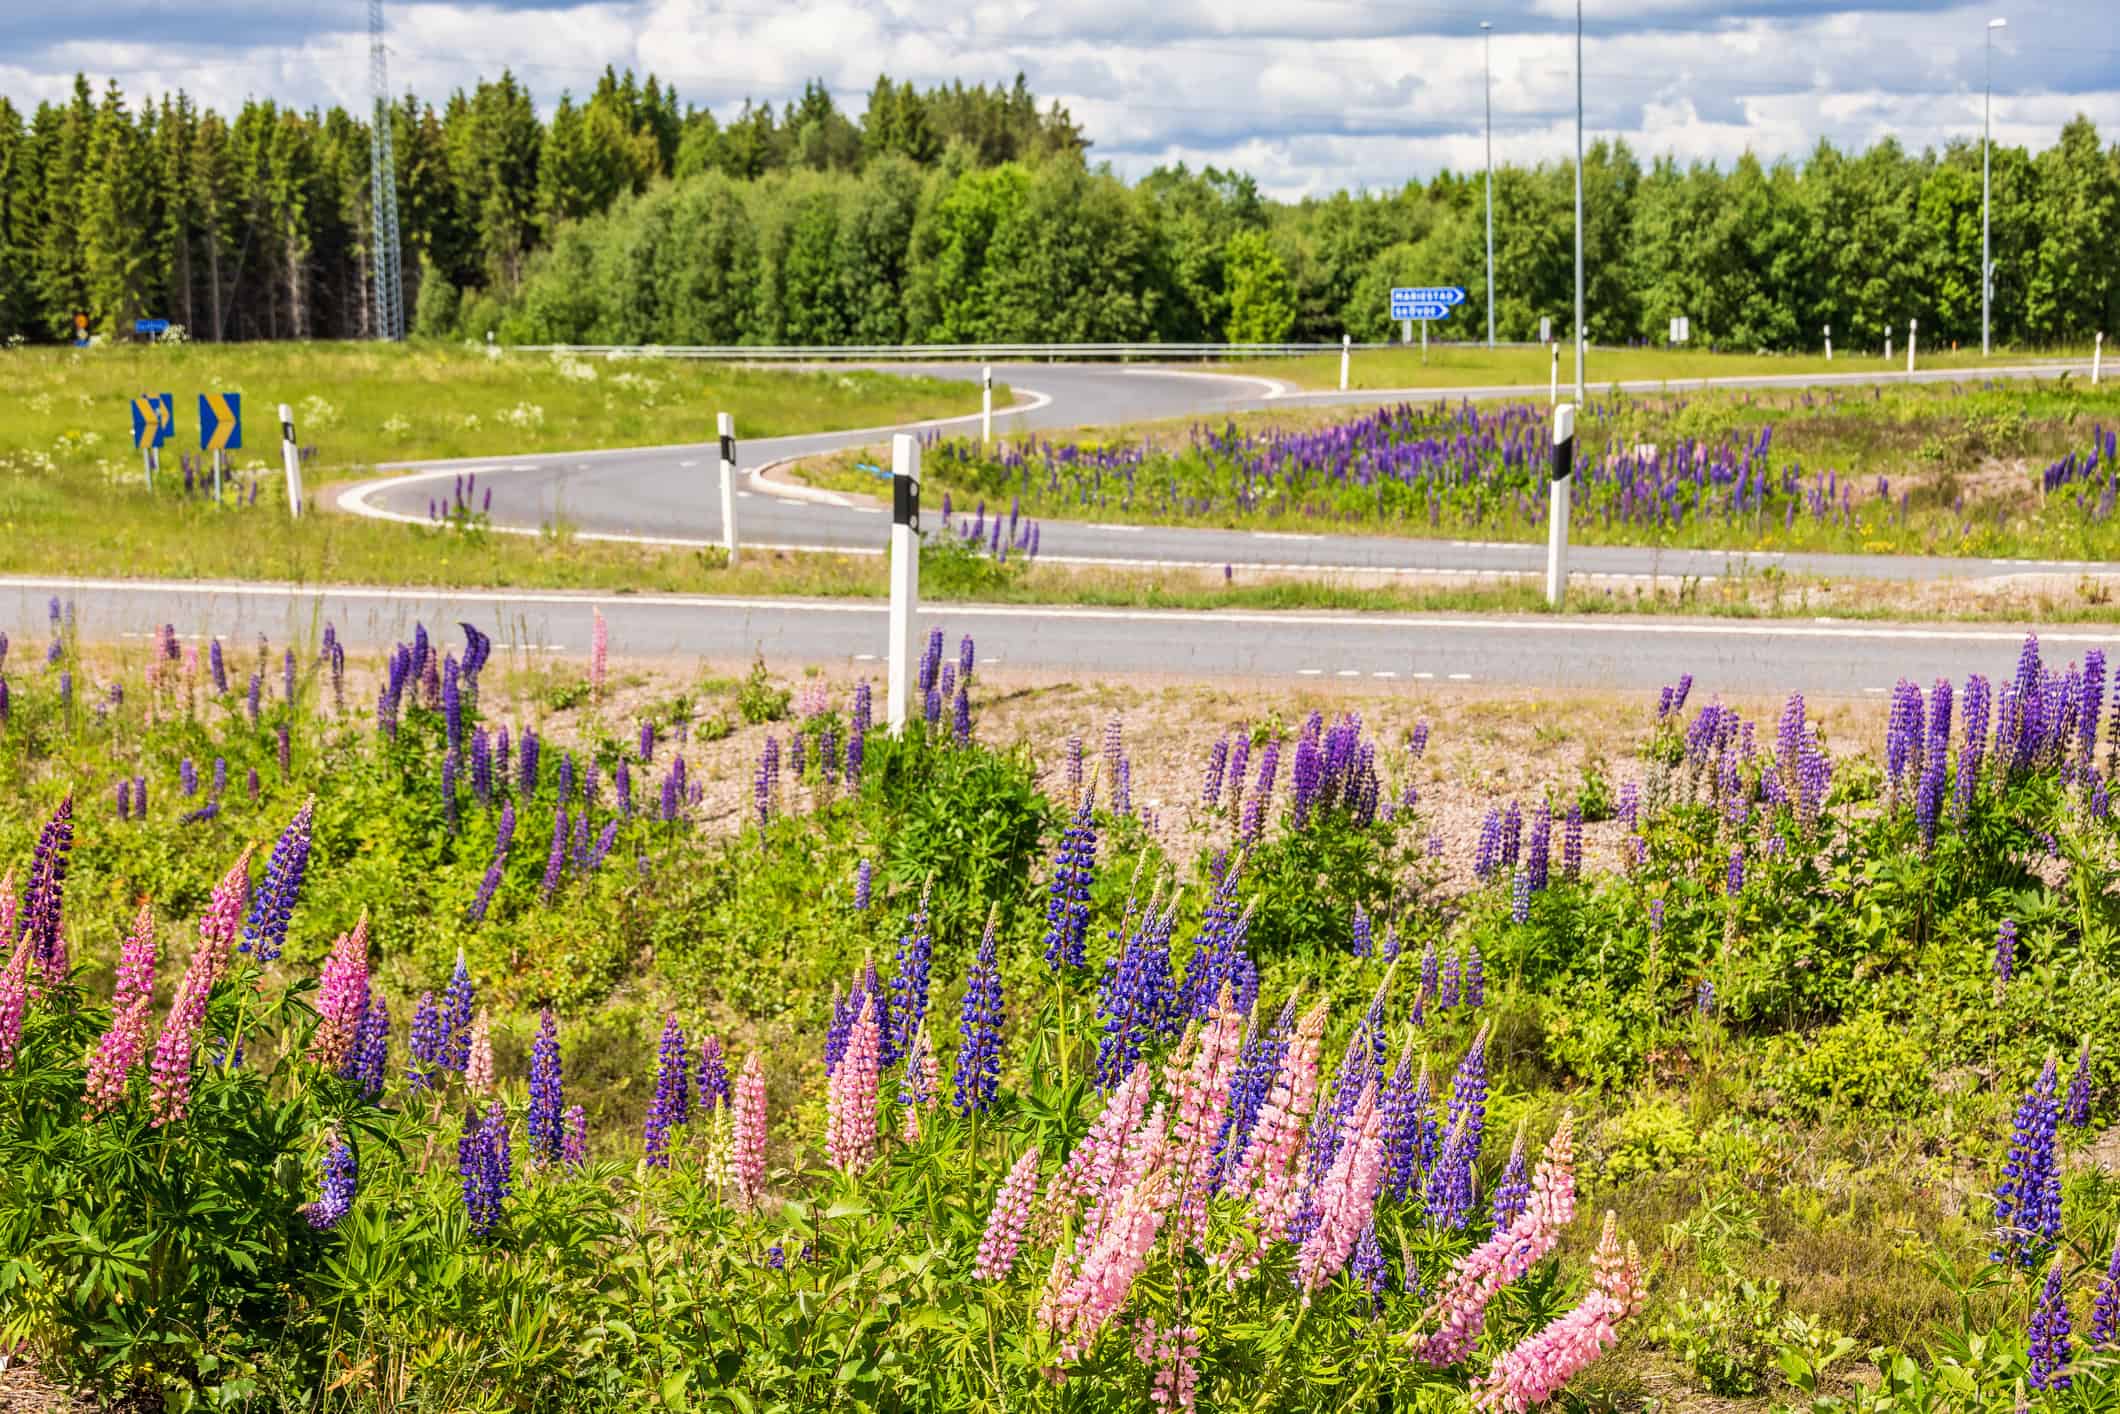 Flowering lupines by a roundabout in the countryside